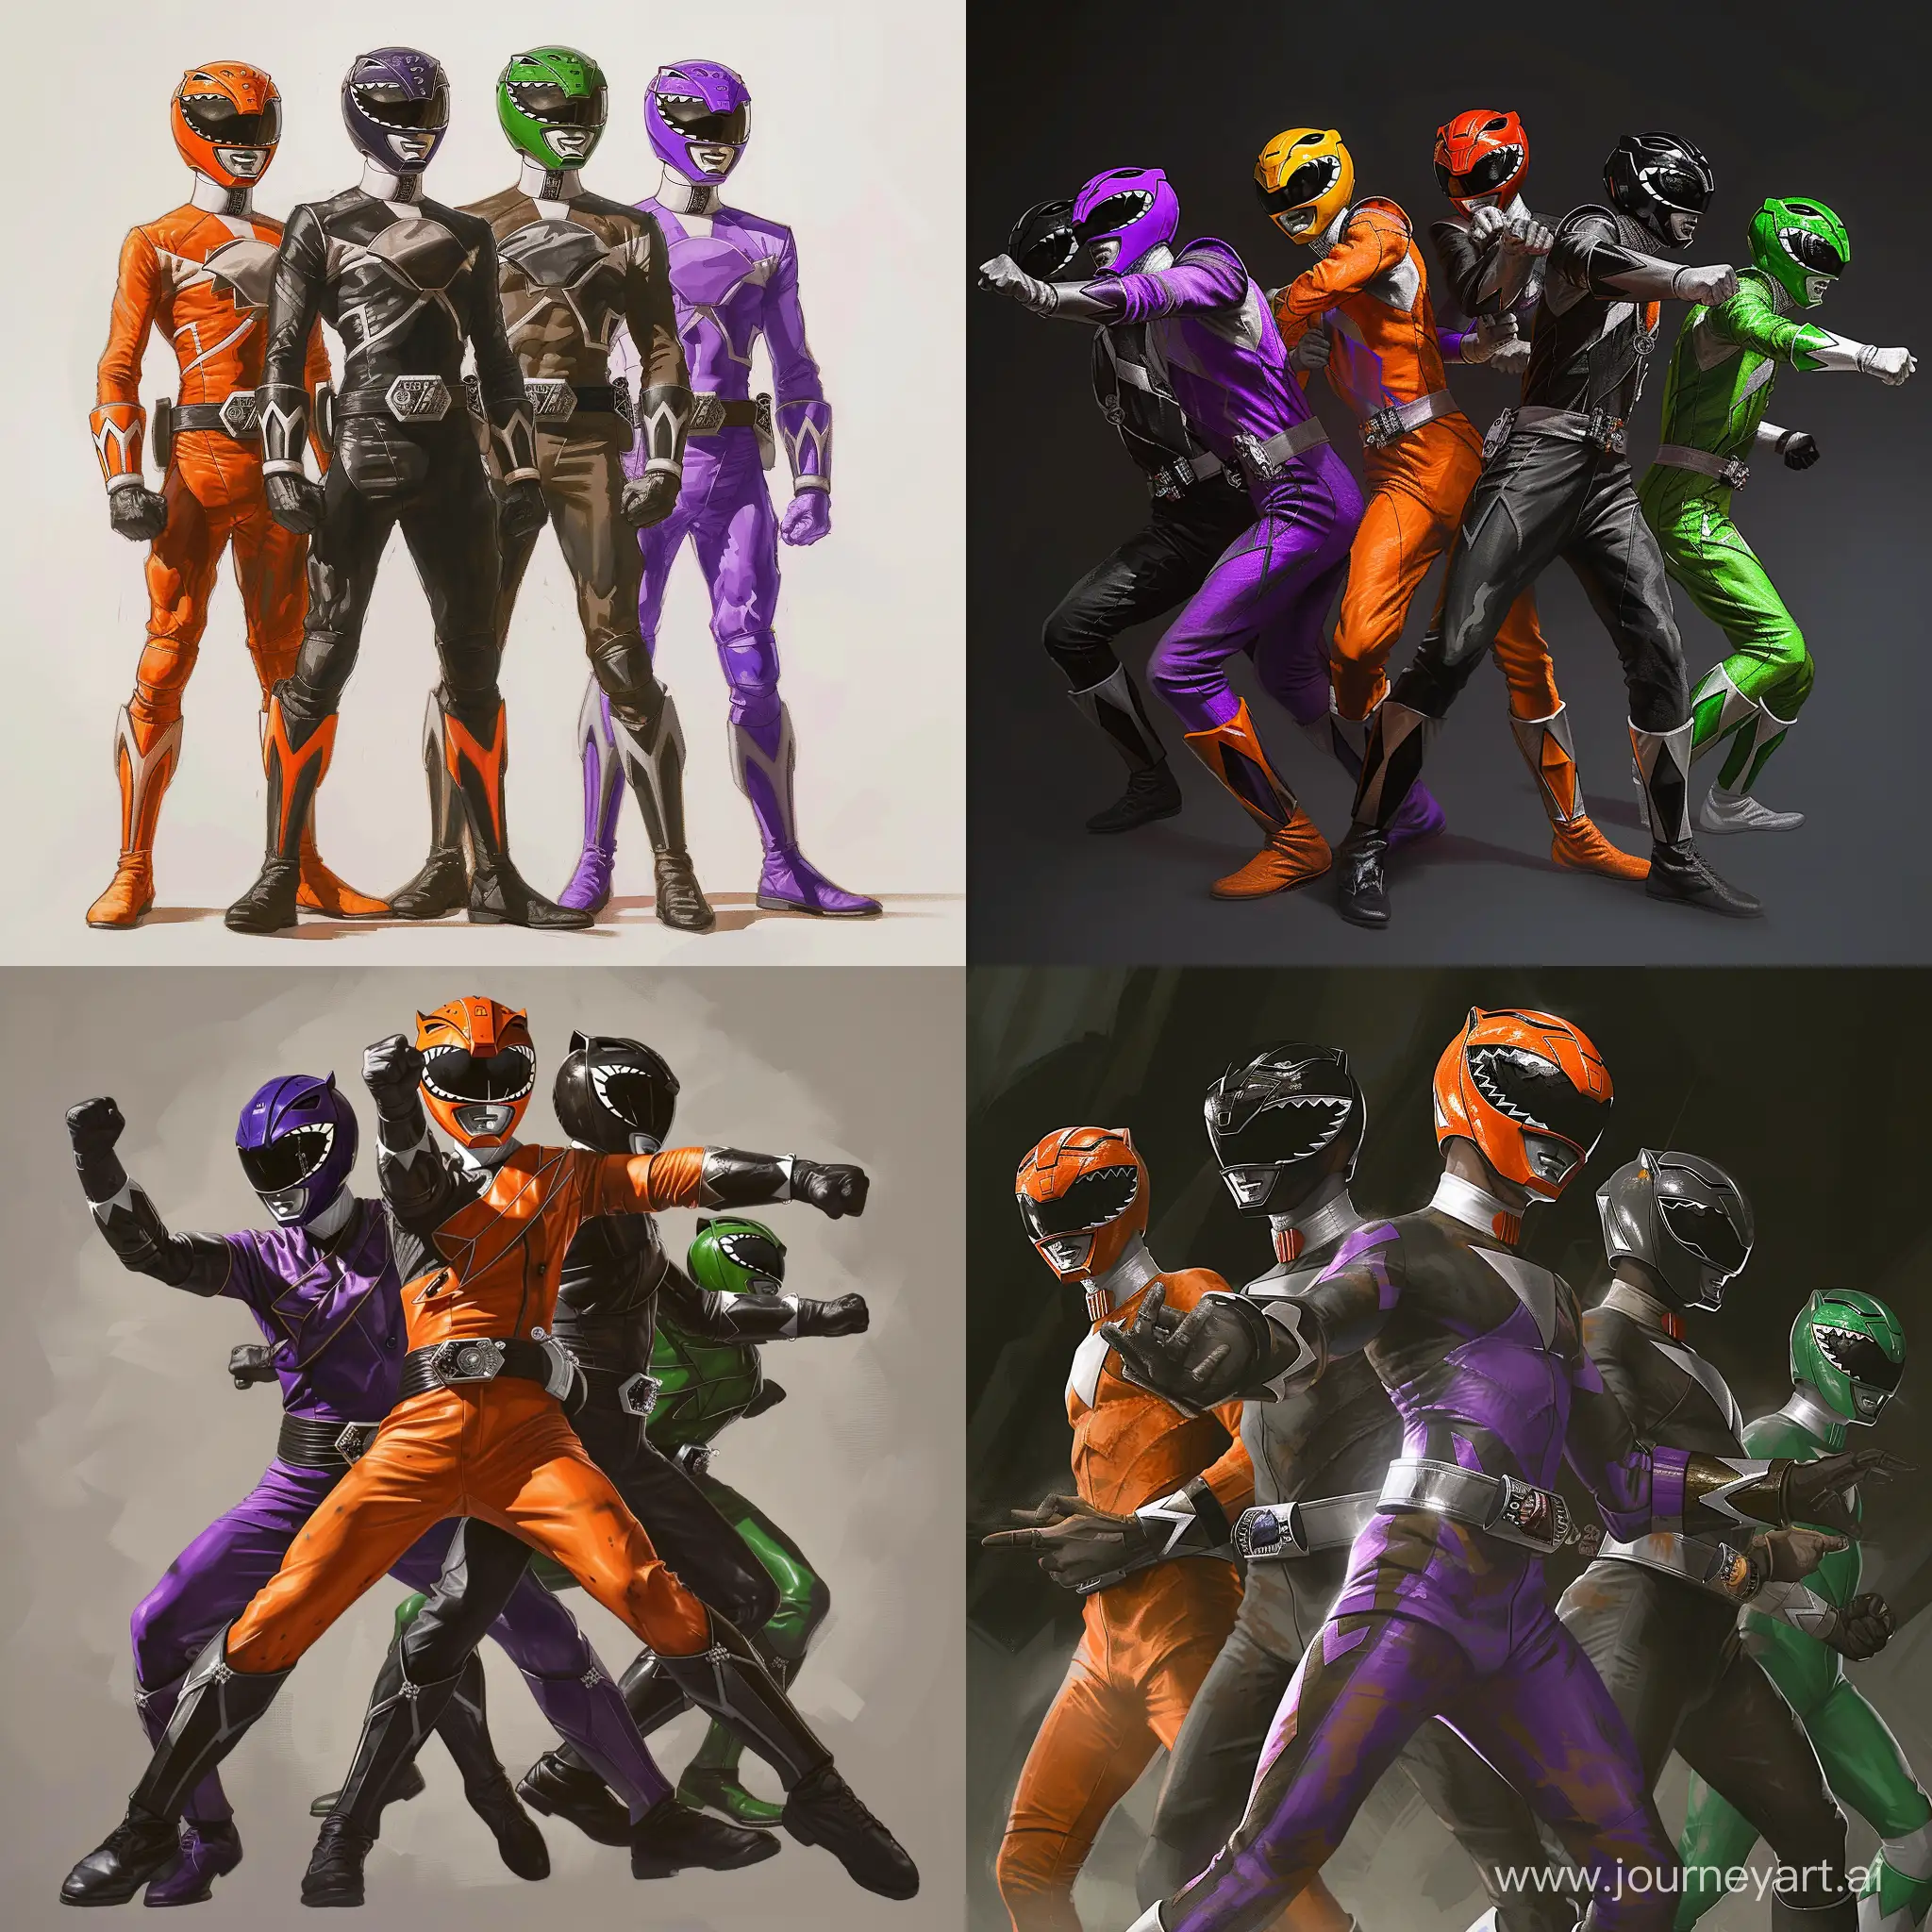 A realistic depiction of a group of 5 Power Rangers. Use the colors orange, purple, black, green, and grey for each ranger. full body. ultra realistic. fighting pose.